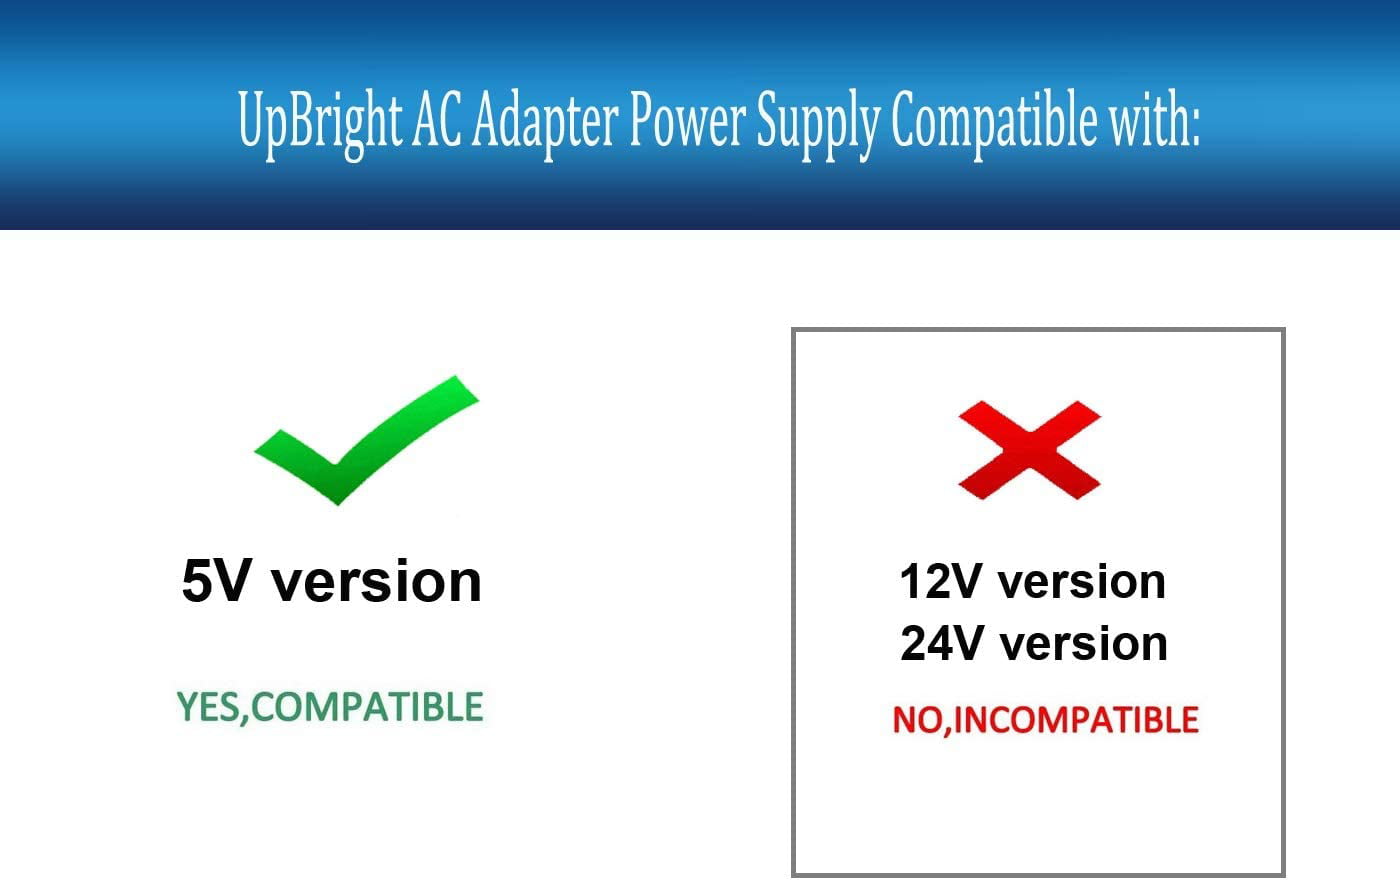 UpBright 5V AC/DC Adapter Compatible with Philips Hue 2.0 2.1 Zigbee IP  Bridge 3241312018A Anatel 1st 2nd 3rd Gen Generation Wireless Lighting WiFi  LED CE0979 458471 464479 S005BMM0500100 Power Supply